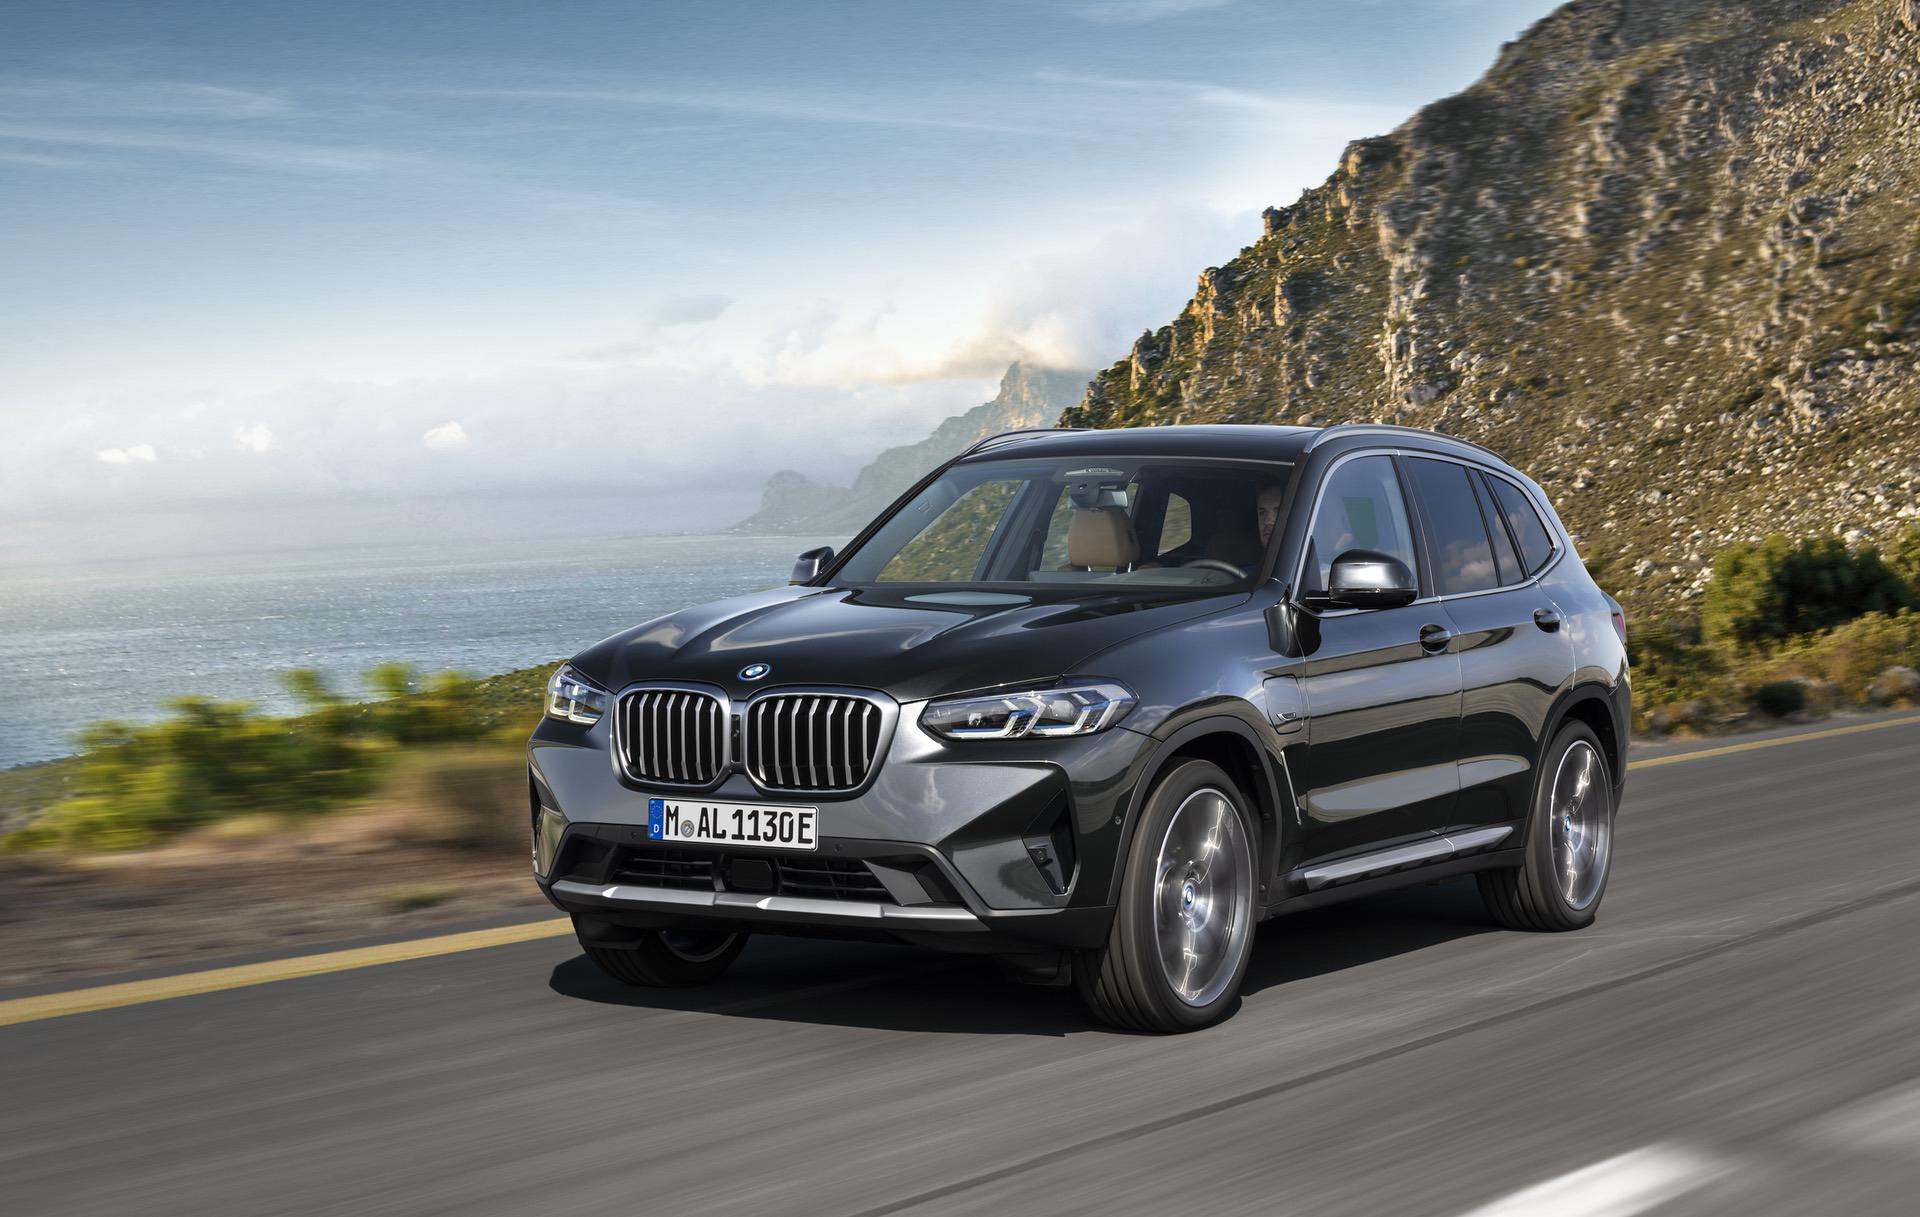 2022 BMW X3 - Pricing, New Styling And Colors, Packages